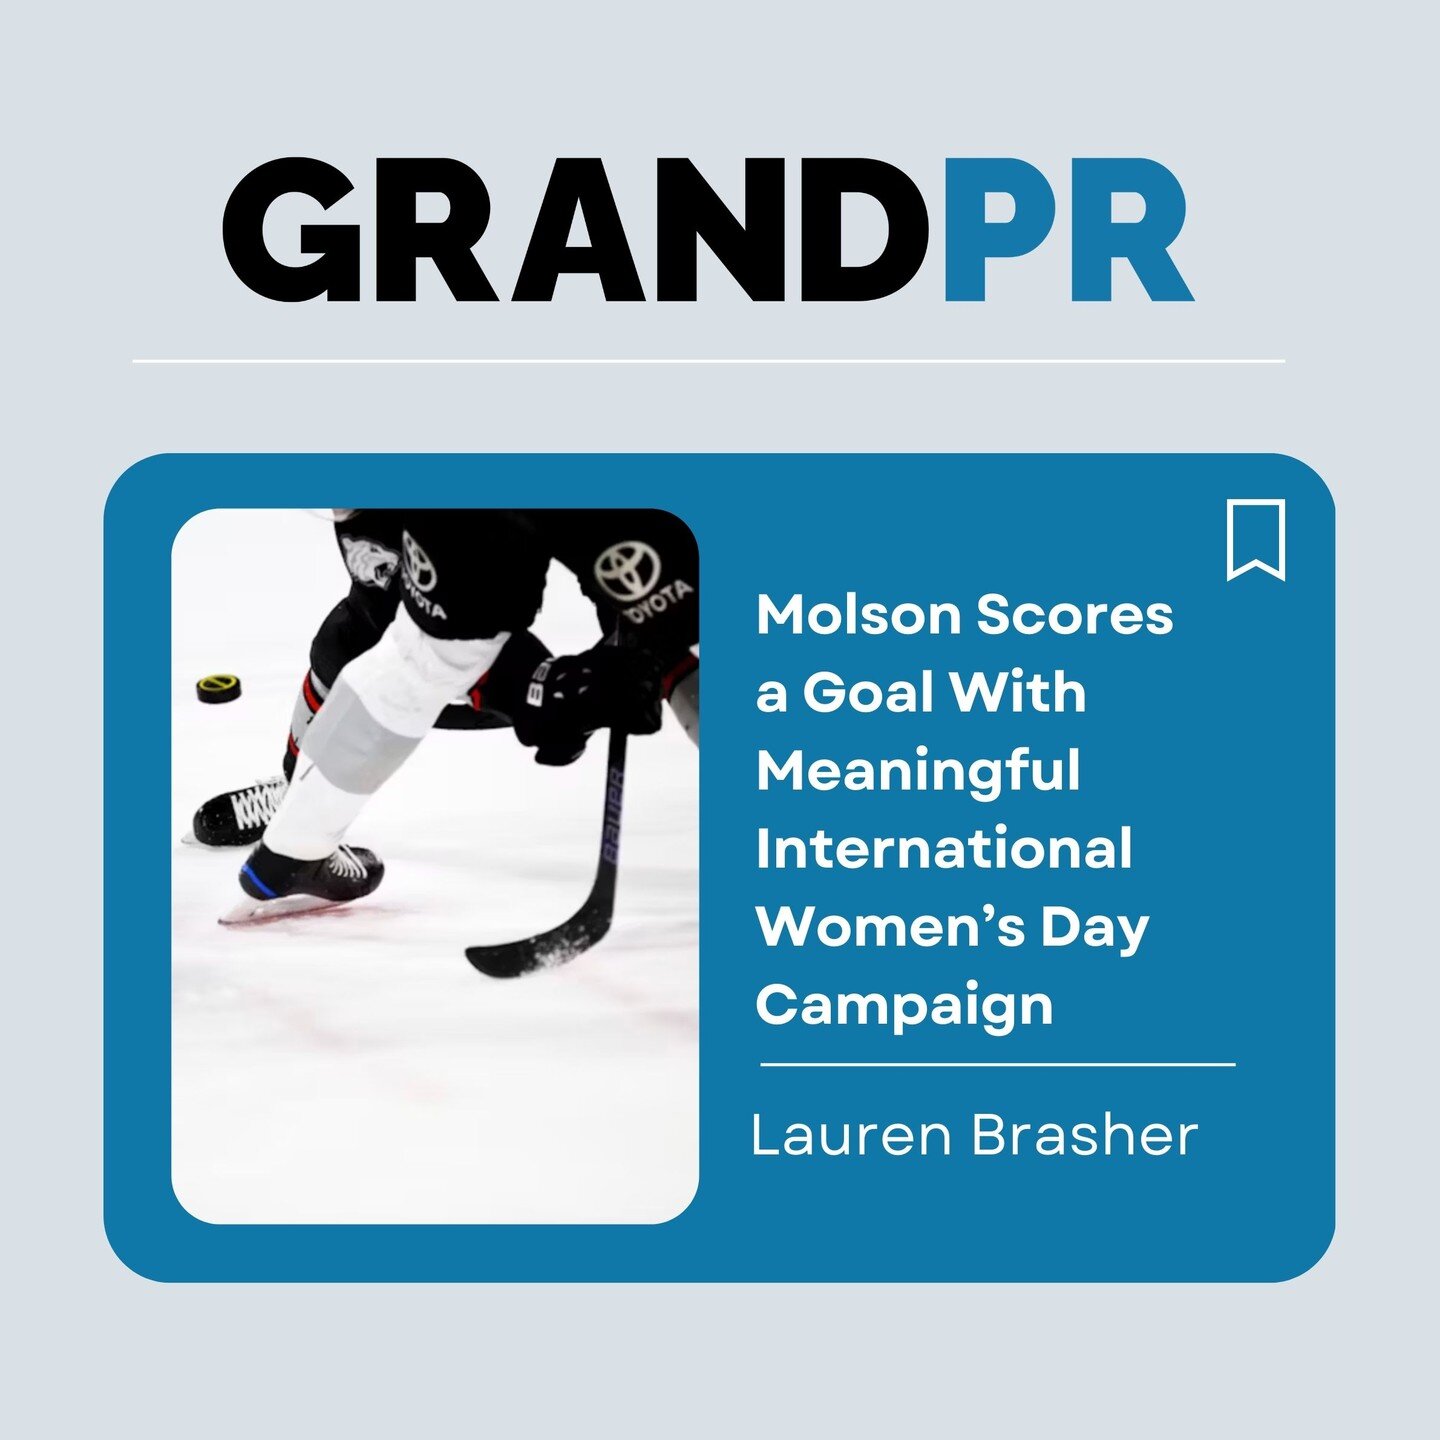 Celebrate the last month of the semester with not one, but TWO new blogs by Lauren Brasher and Ana Zapata! Brush up on your knowledge of crisis communication and read about an inspiring campaign that scored big via the link in our bio! 🌟 🏒 

#Grand